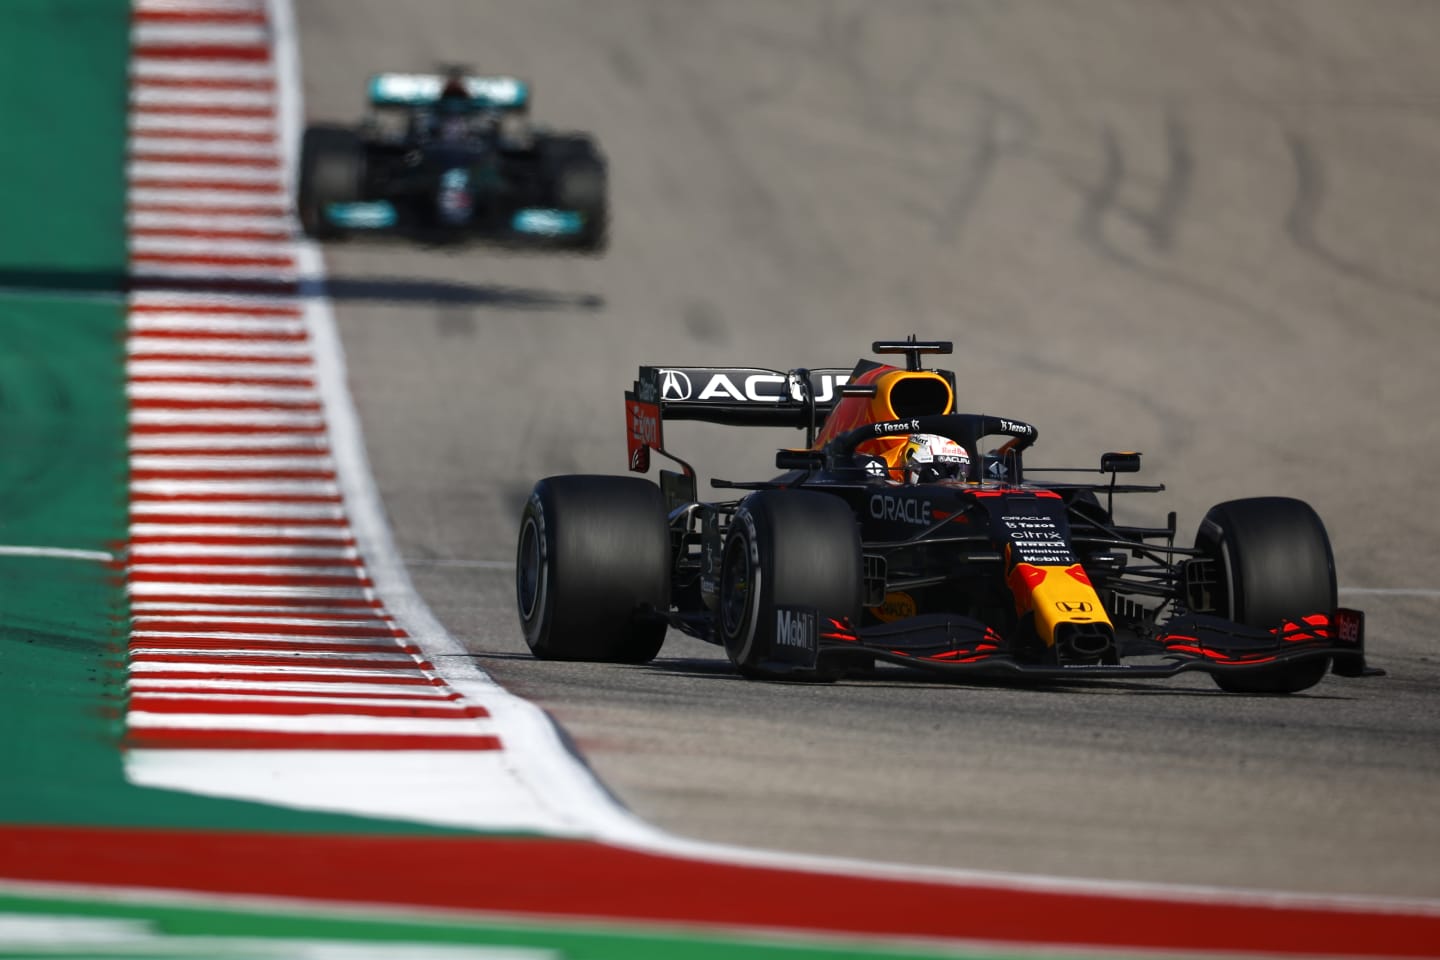 AUSTIN, TEXAS - OCTOBER 24: Max Verstappen of the Netherlands driving the (33) Red Bull Racing RB16B Honda leads Lewis Hamilton of Great Britain driving the (44) Mercedes AMG Petronas F1 Team Mercedes W12 during the F1 Grand Prix of USA at Circuit of The Americas on October 24, 2021 in Austin, Texas. (Photo by Jared C. Tilton/Getty Images)